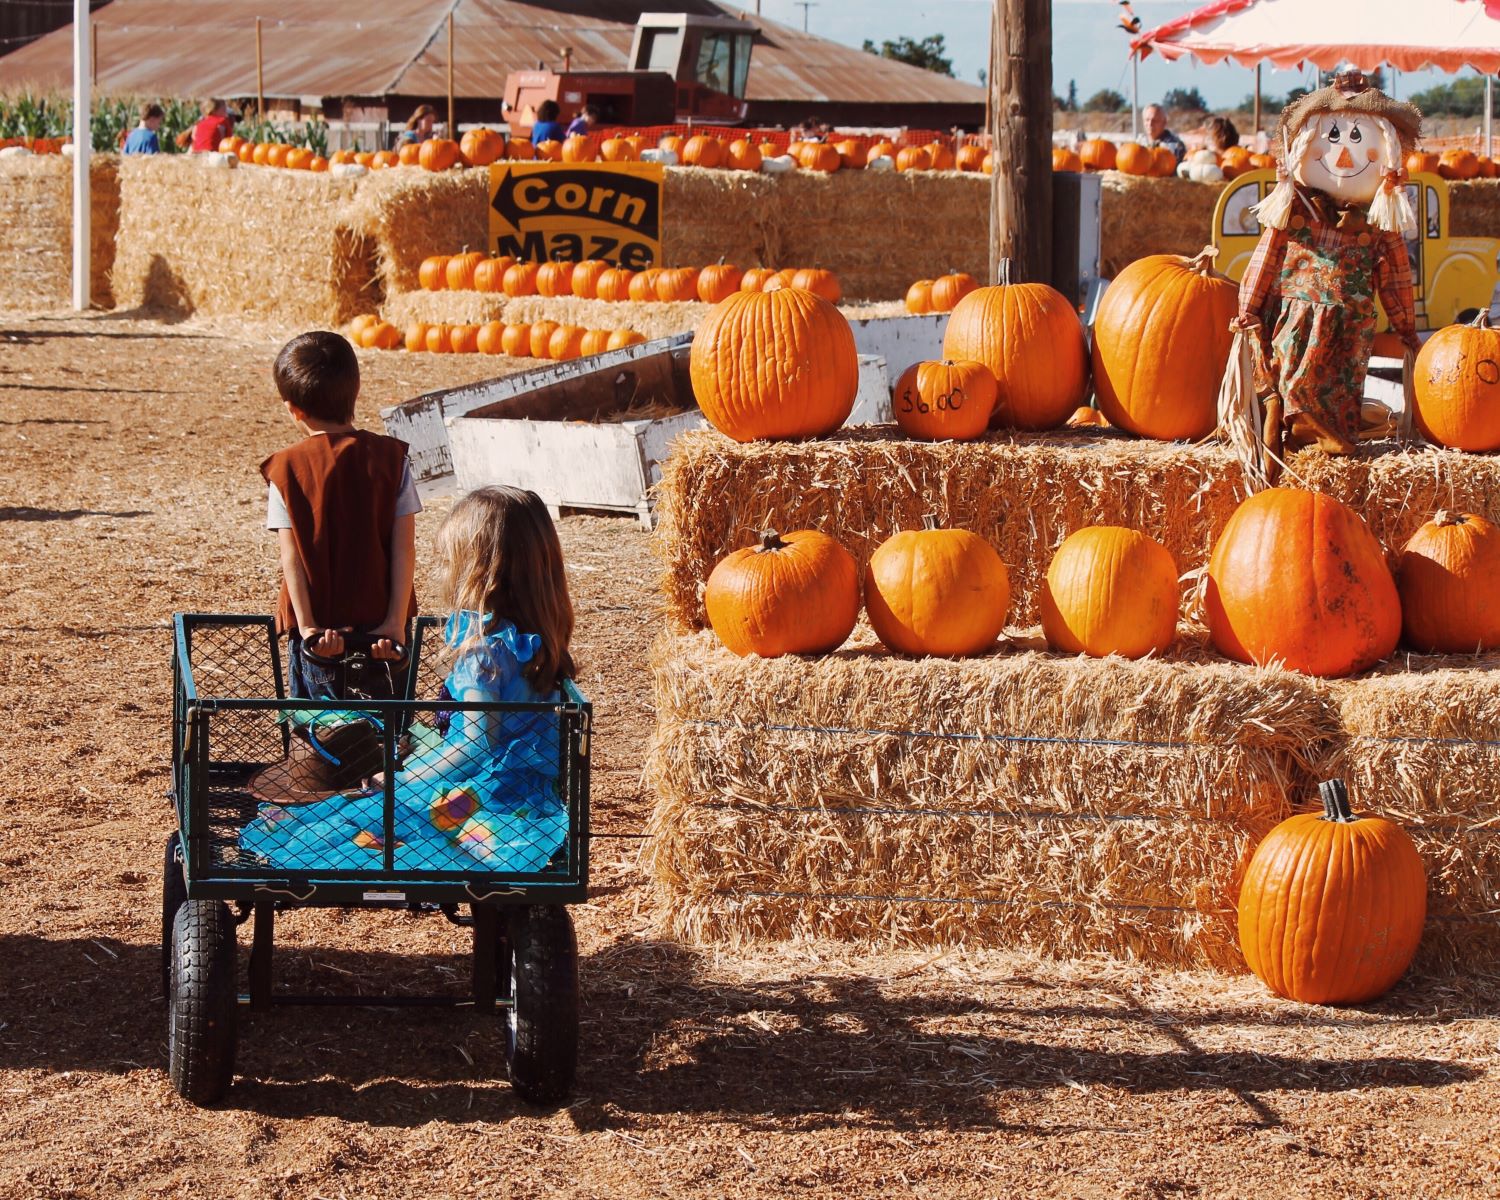 5 Harvest Festivals and Pumpkin Patches in the Salem, Oregon Area